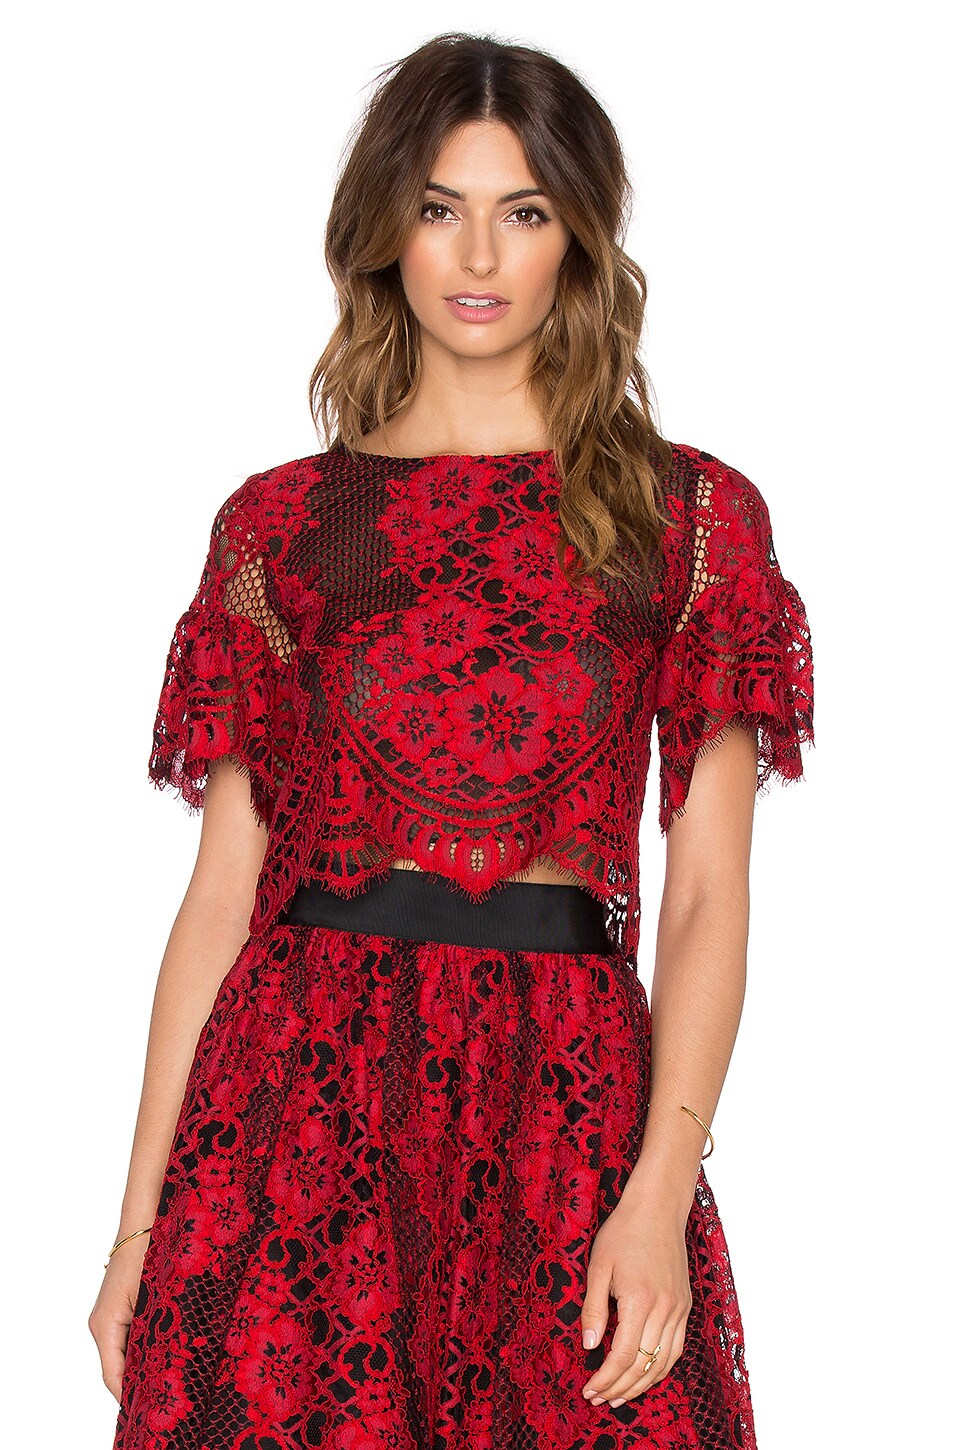 Alexis Piero Sheer Lace Crop Top in Red Lace | REVOLVE